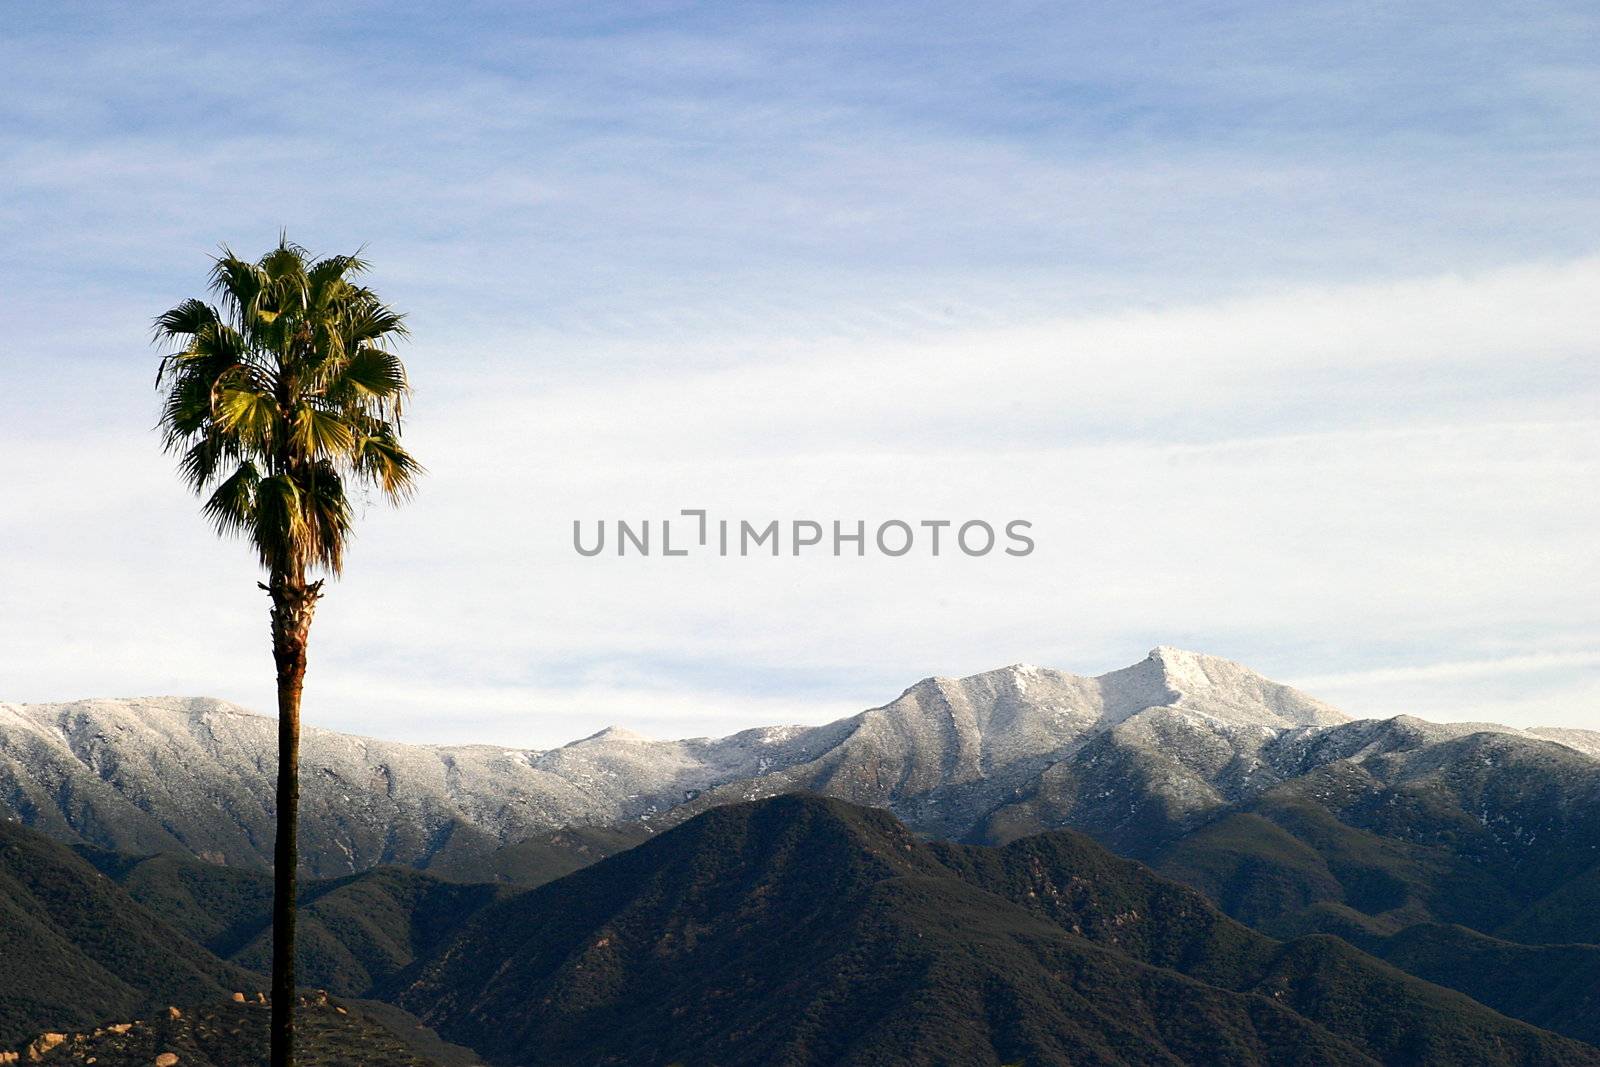 Landscape shot of the Ojai valley with snow on the mountains.